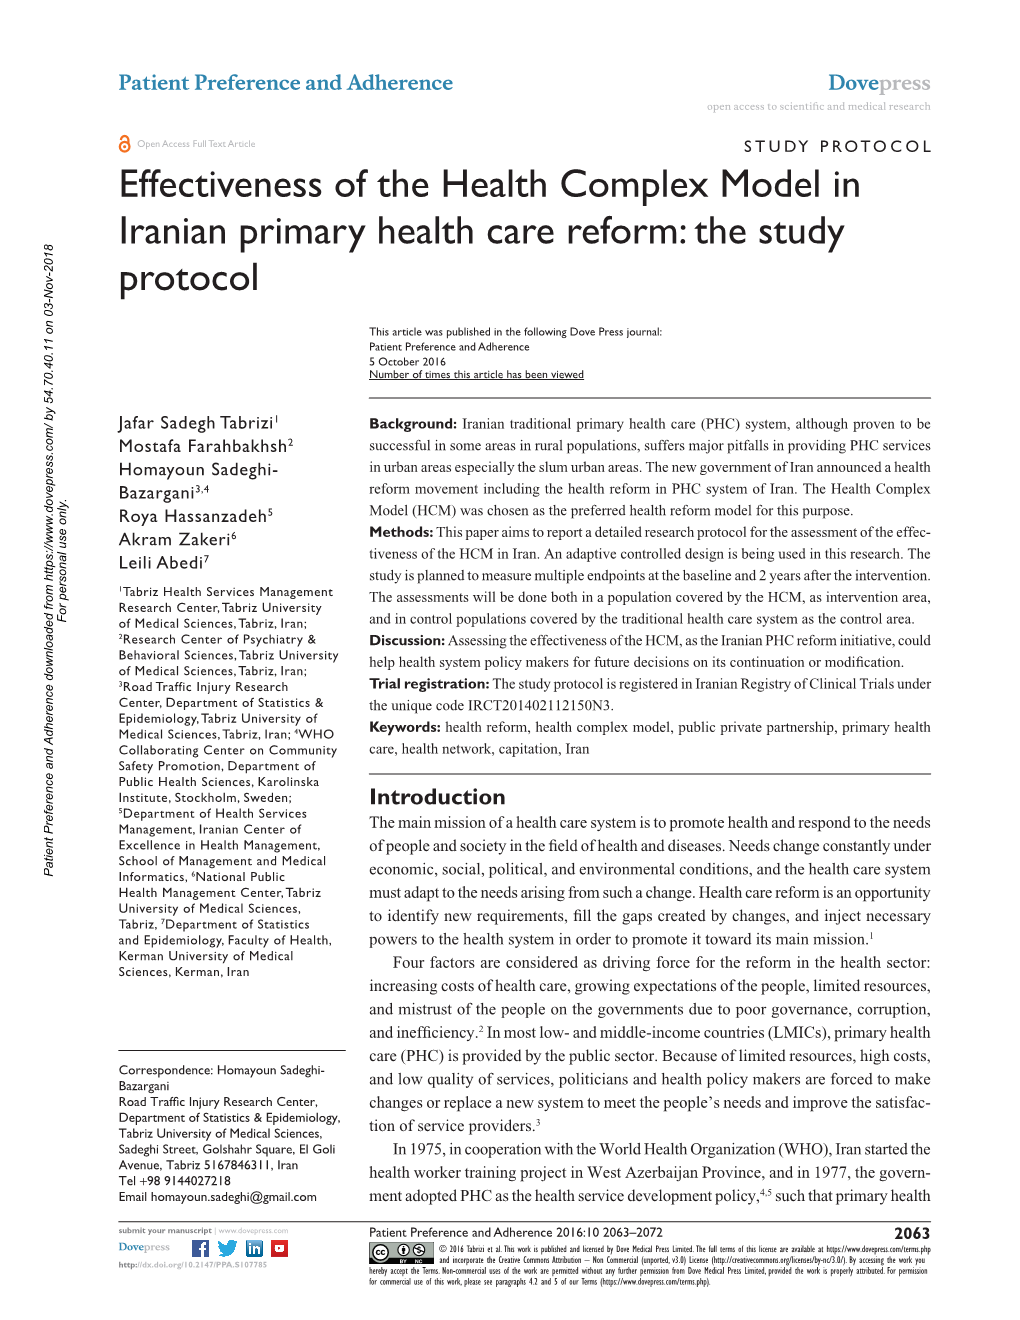 Effectiveness of the Health Complex Model in Iranian Primary Health Care Reform: the Study Protocol